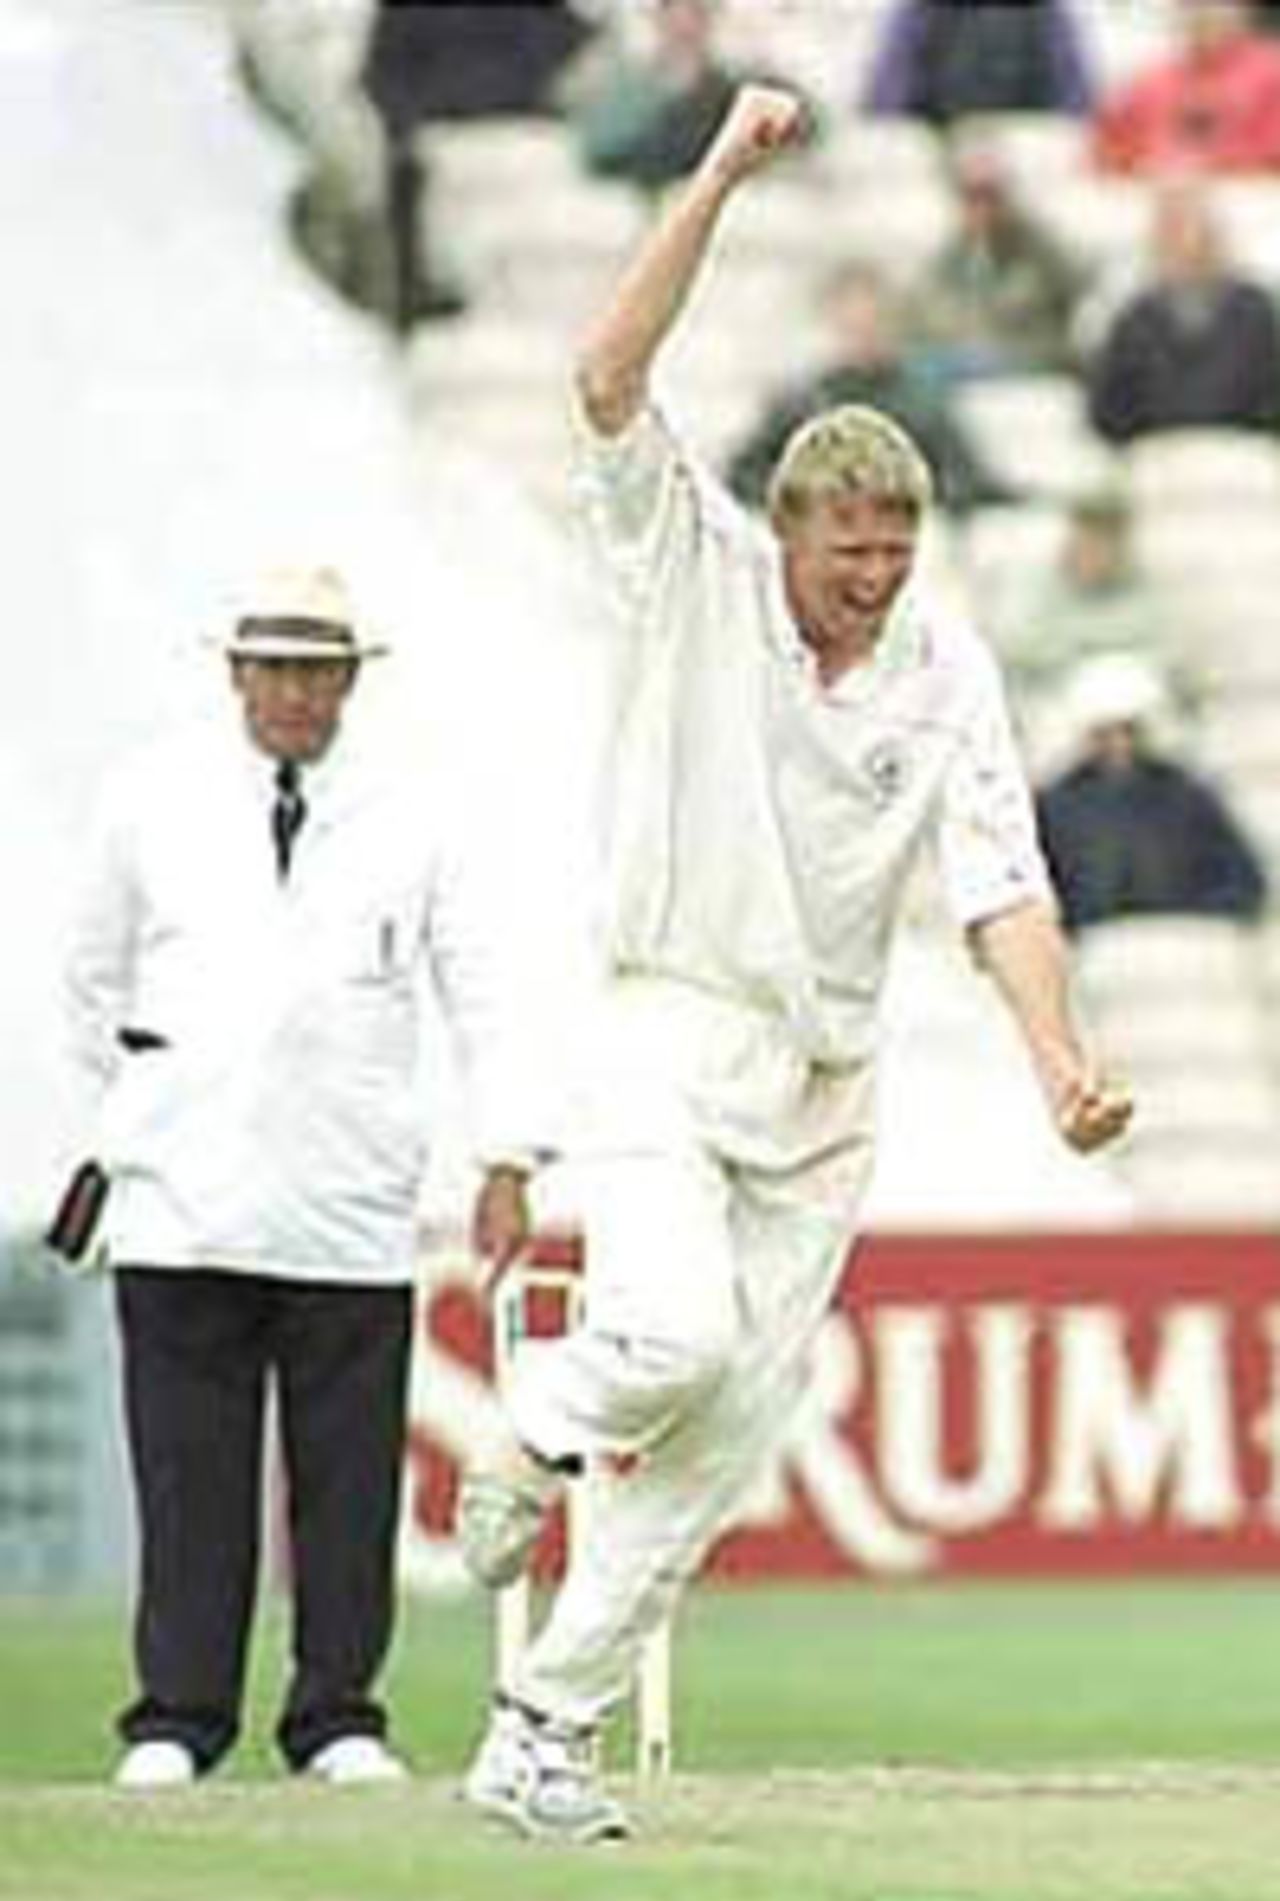 Peter Martin celebrates the fall of a wicket, PPP healthcare County Championship Division One, 2000, Lancashire v Leicestershire Old Trafford, Manchester, 3-6 May 2000.